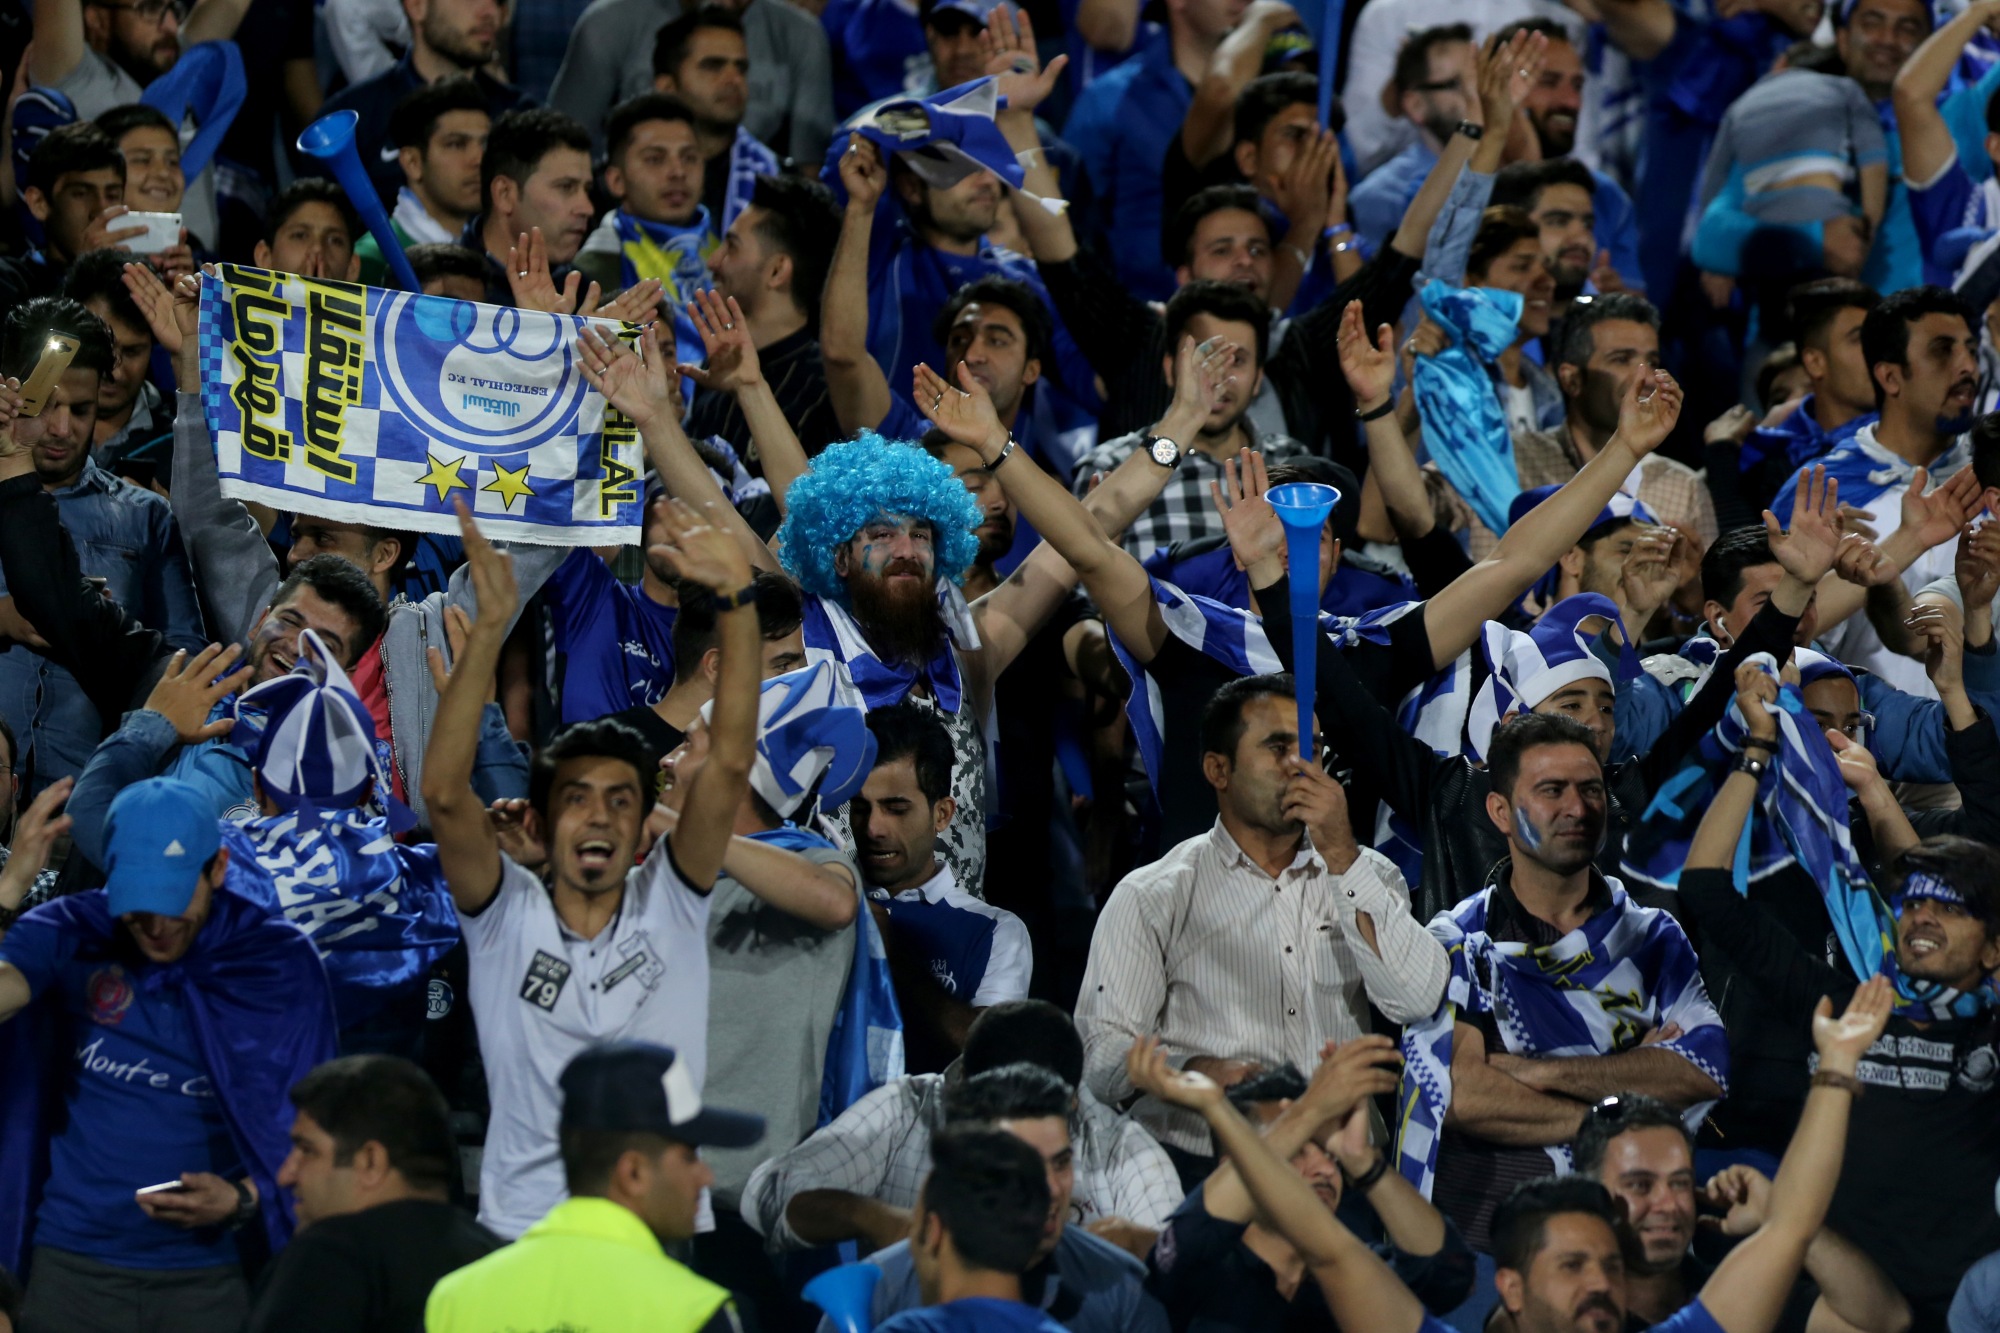 Iranian Esteghlal FC club fans cheer during a 2018 AFC Champions League football match against Zobahan at the Azadi Stadium in Tehran (AFP)